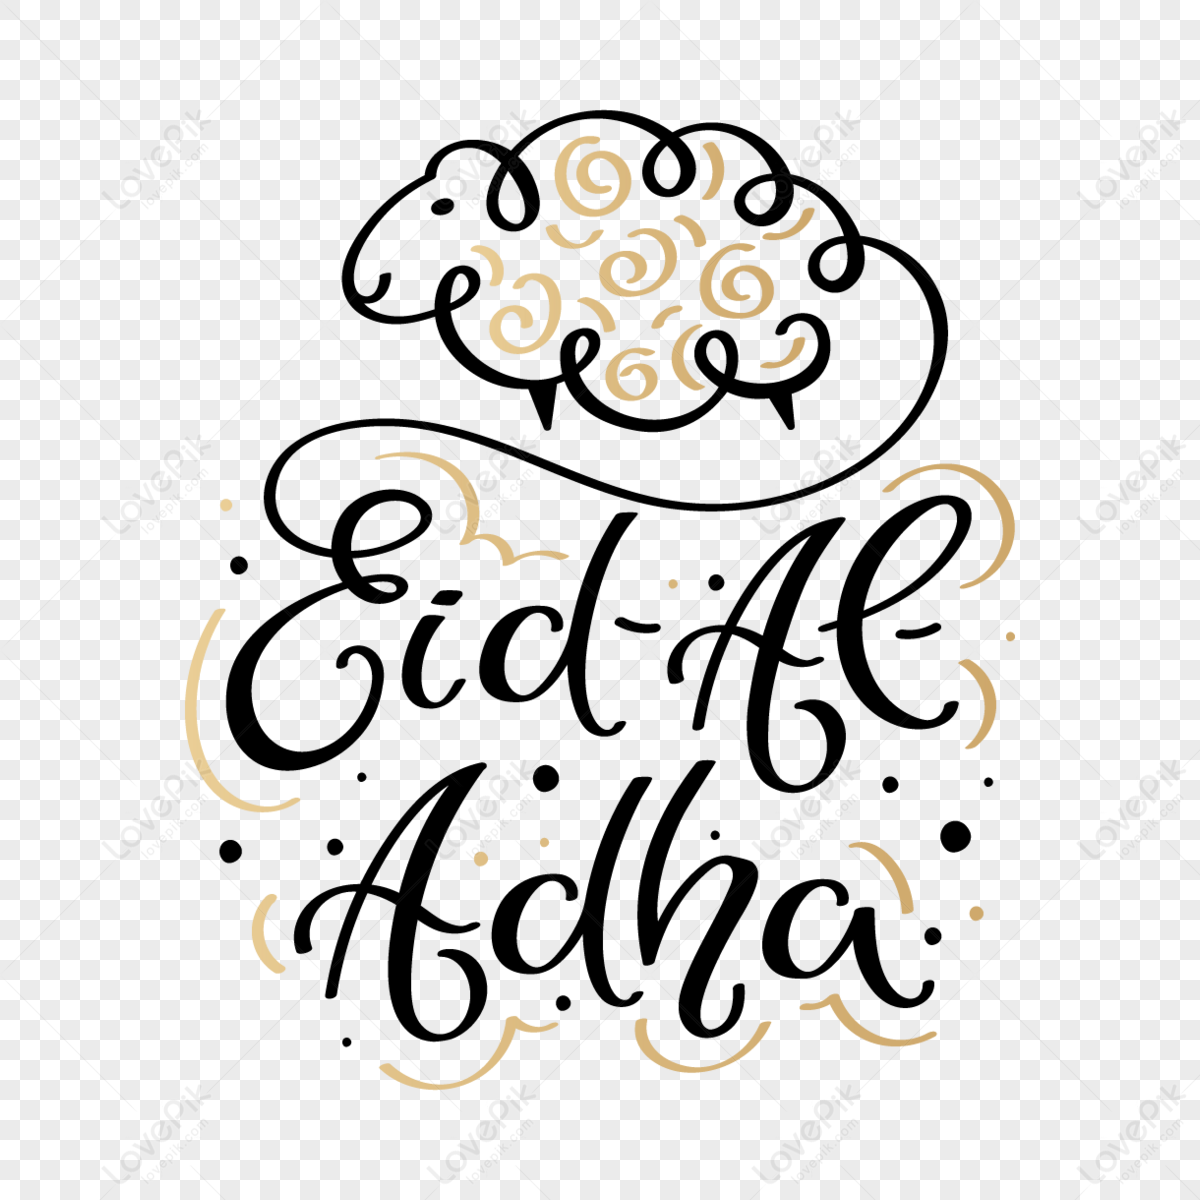 eid al adha  lettering passing into a stylized ram of fine lines in black and gold design png free download